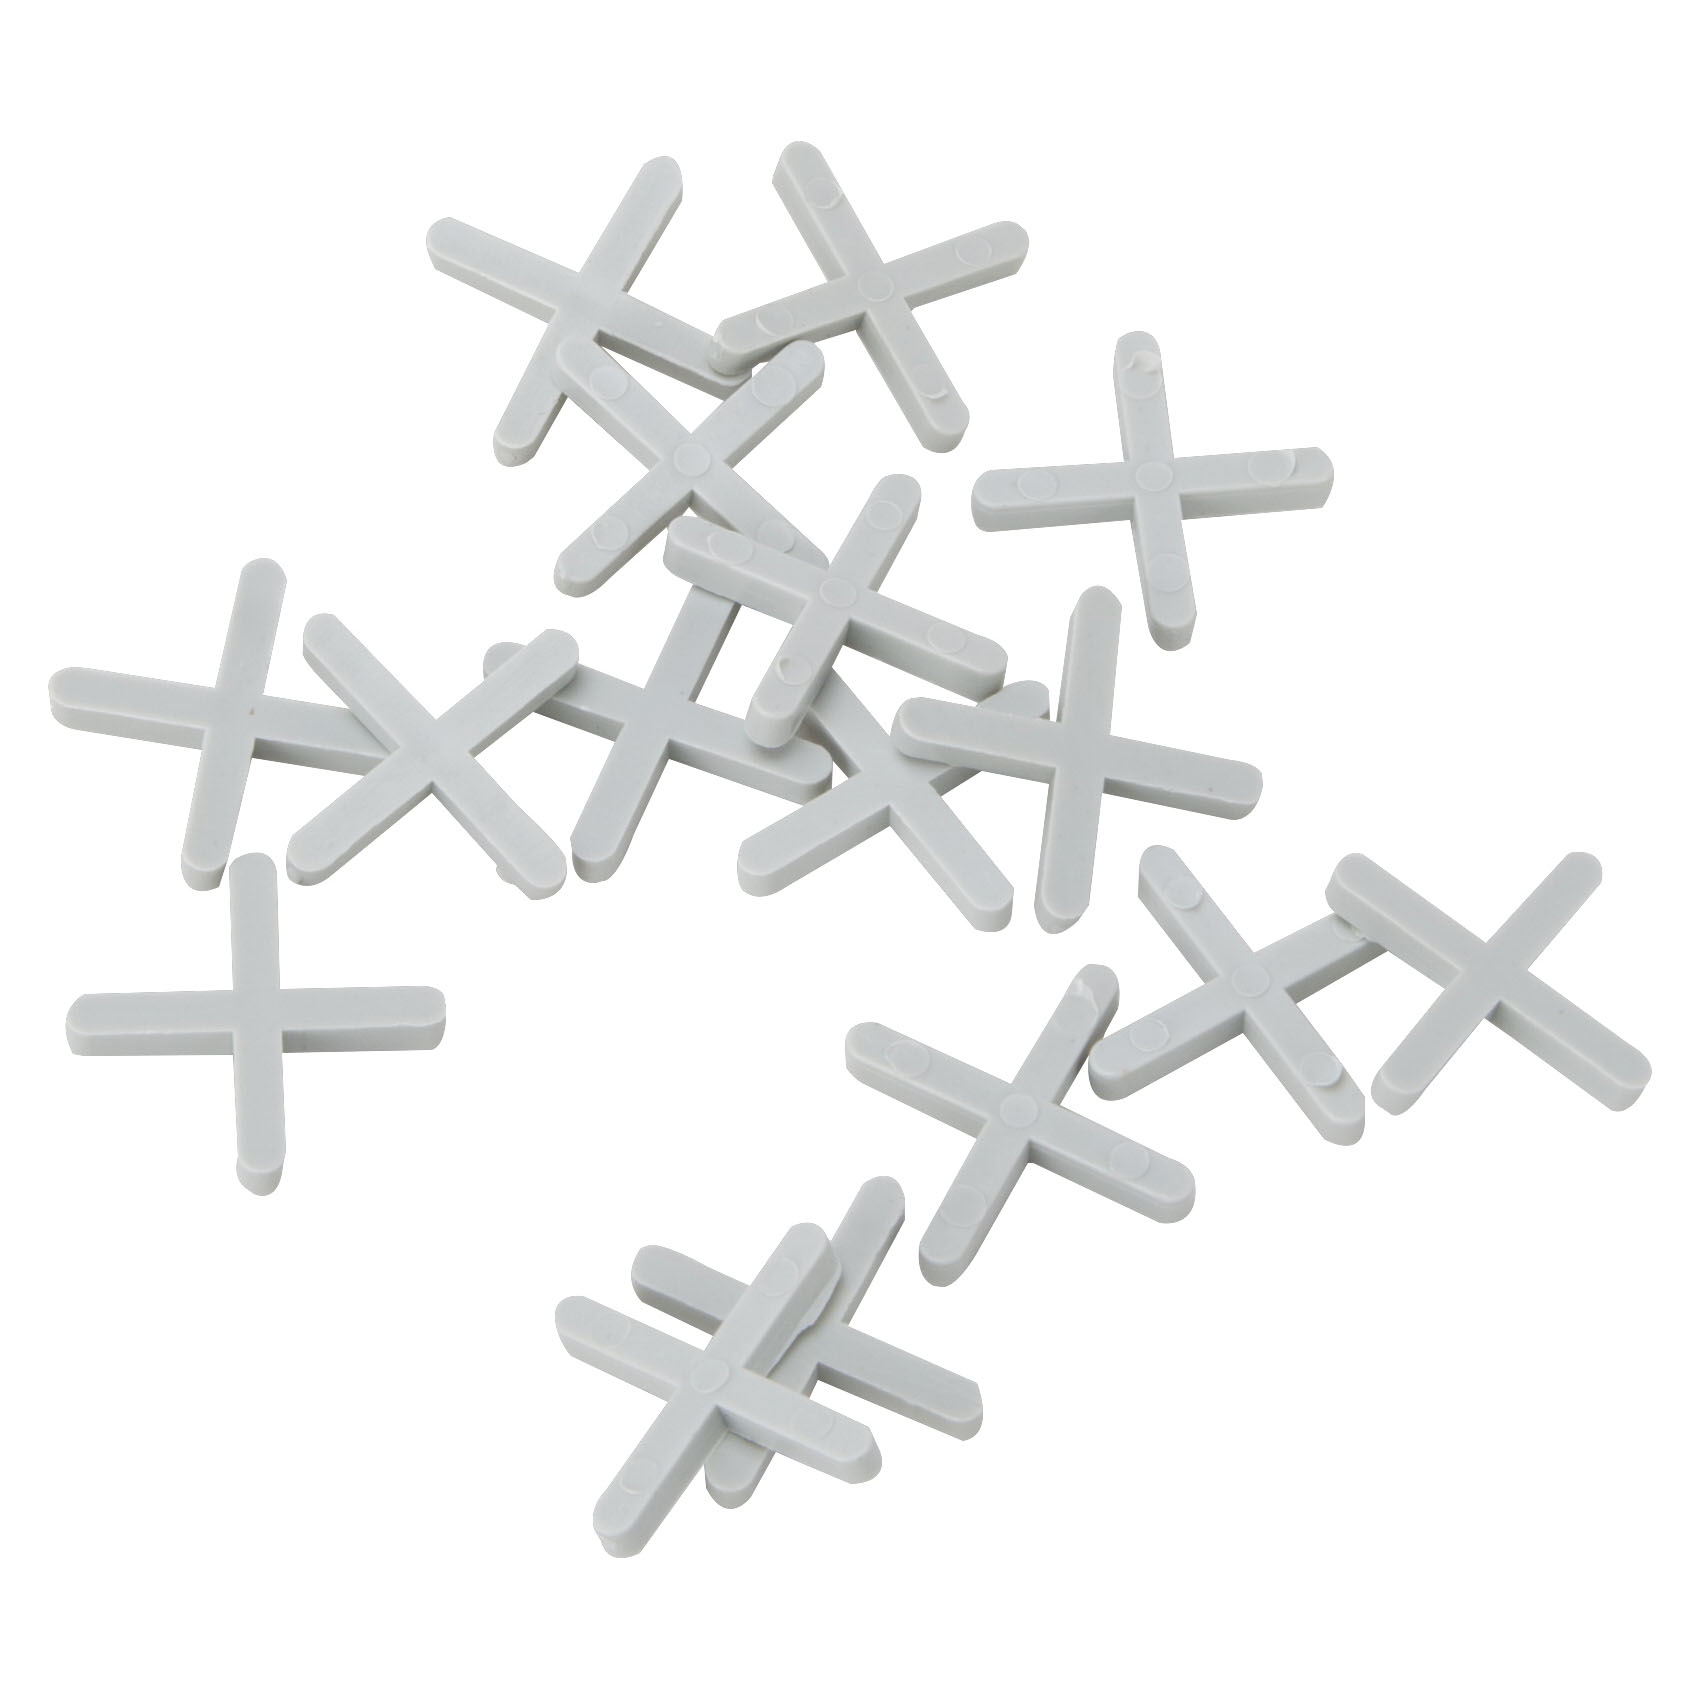 MJ-T80803 Tile Spacer, 1/8 in Thick, Cross, Plastic